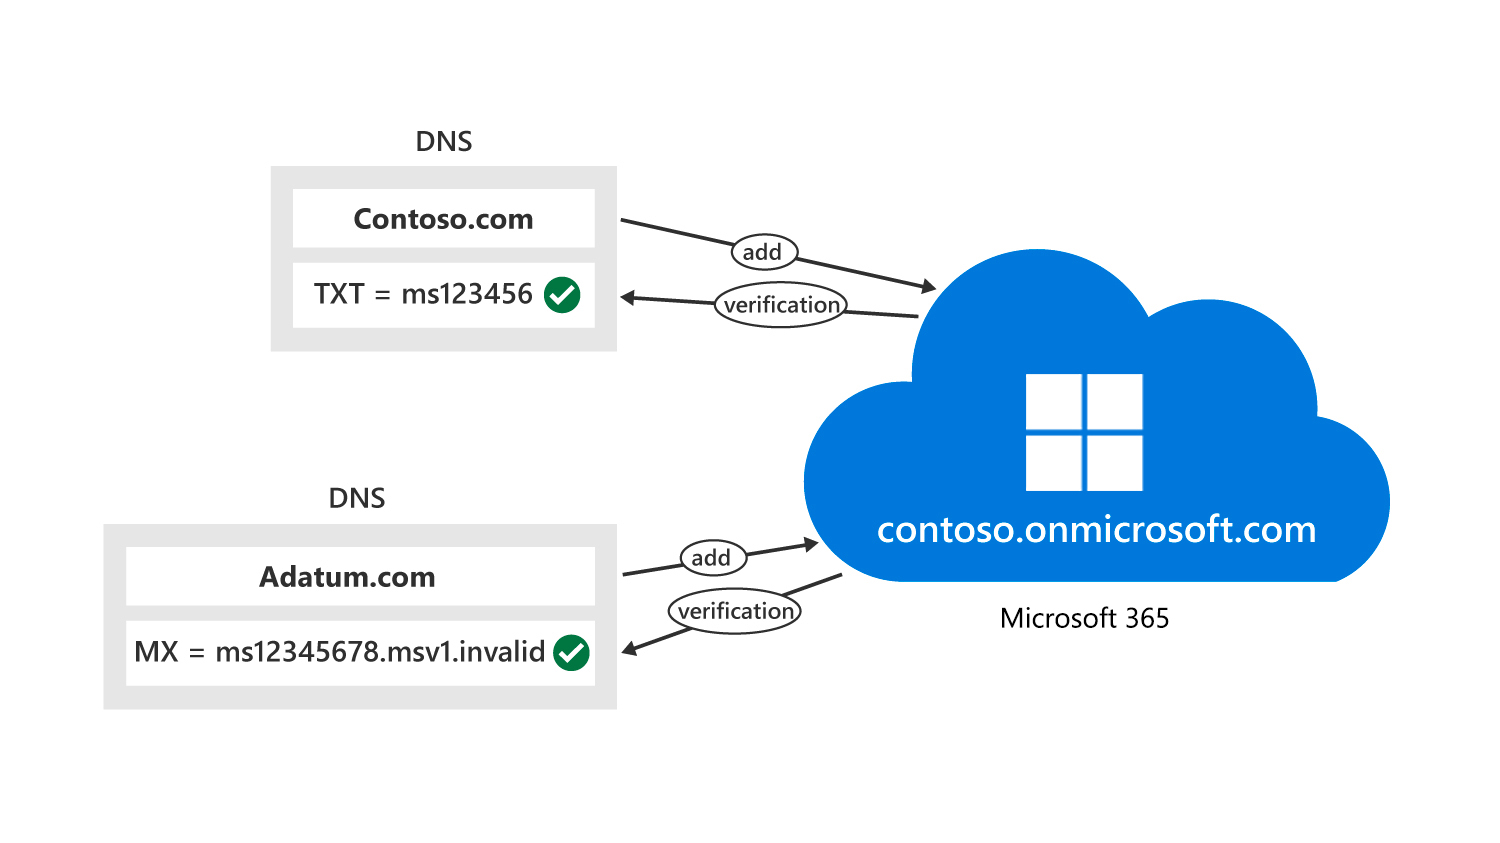 diagram depicts how public domains, managed in their respective provider portals, simply must point to Microsoft 365 to receive emails and use them in Microsoft 365